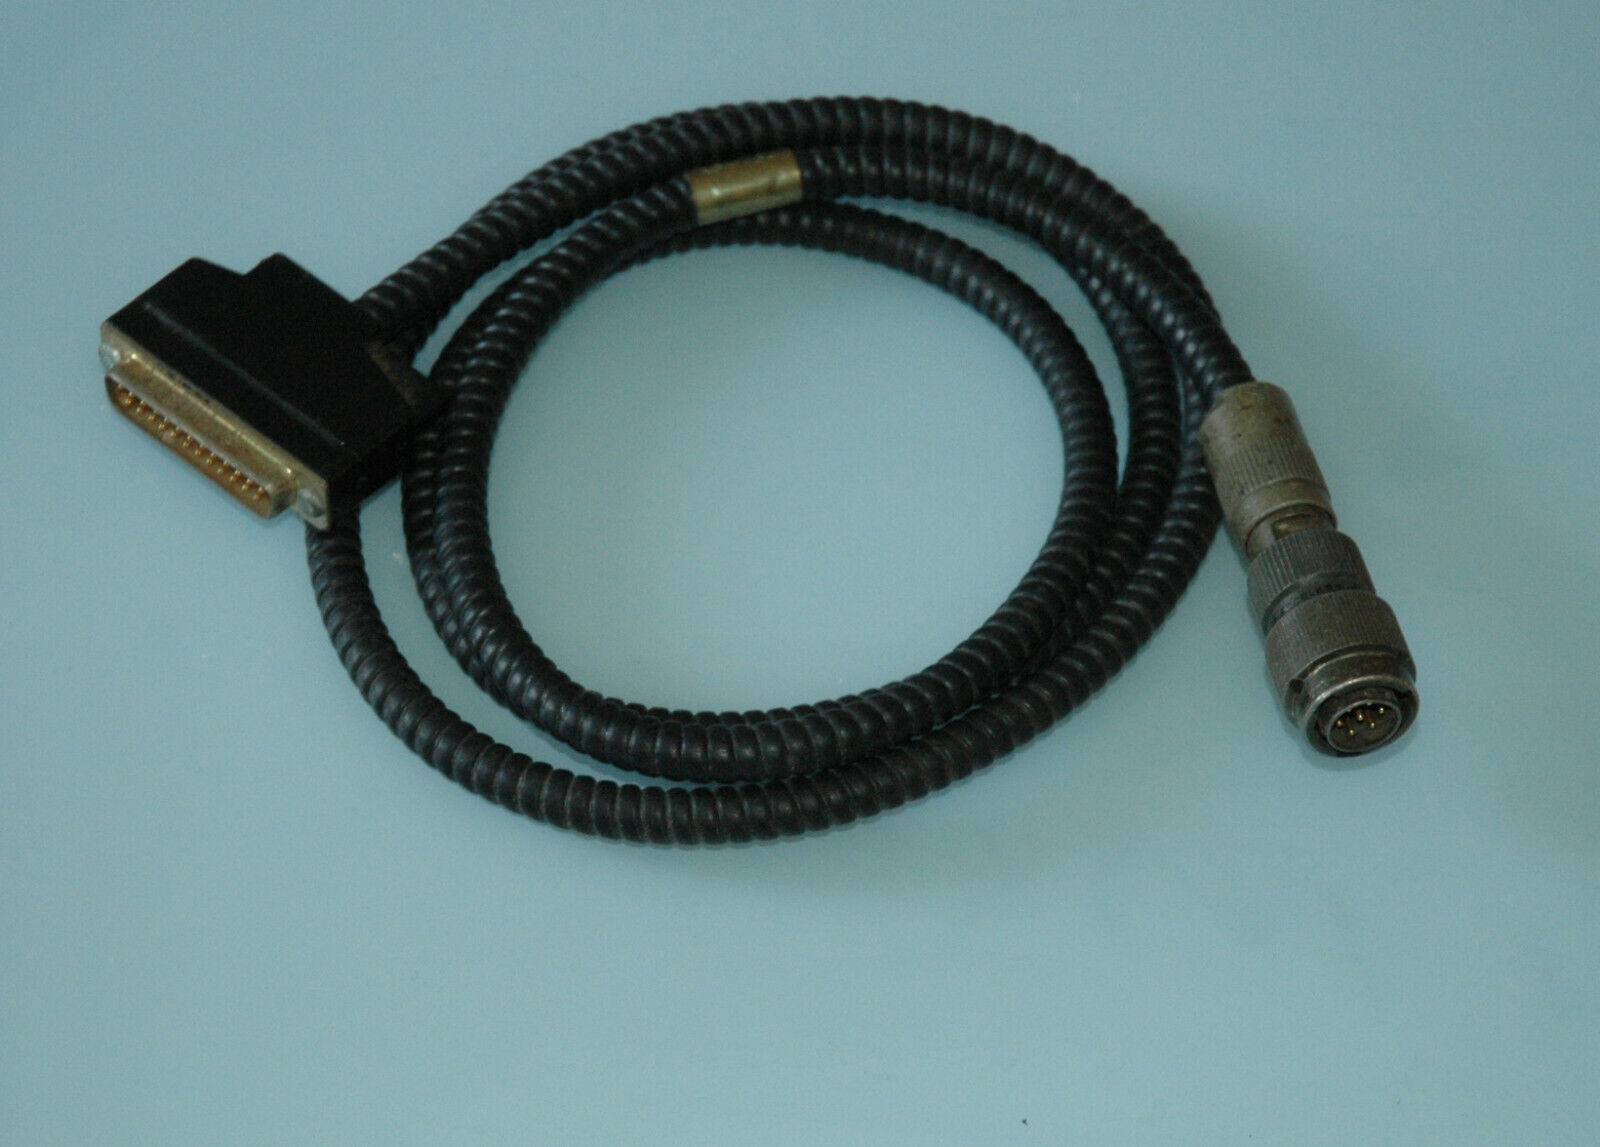 CABLE FOR VARIOUS RACAL SCRAMBLER ENCRYPTION UNIT MEROD (9)